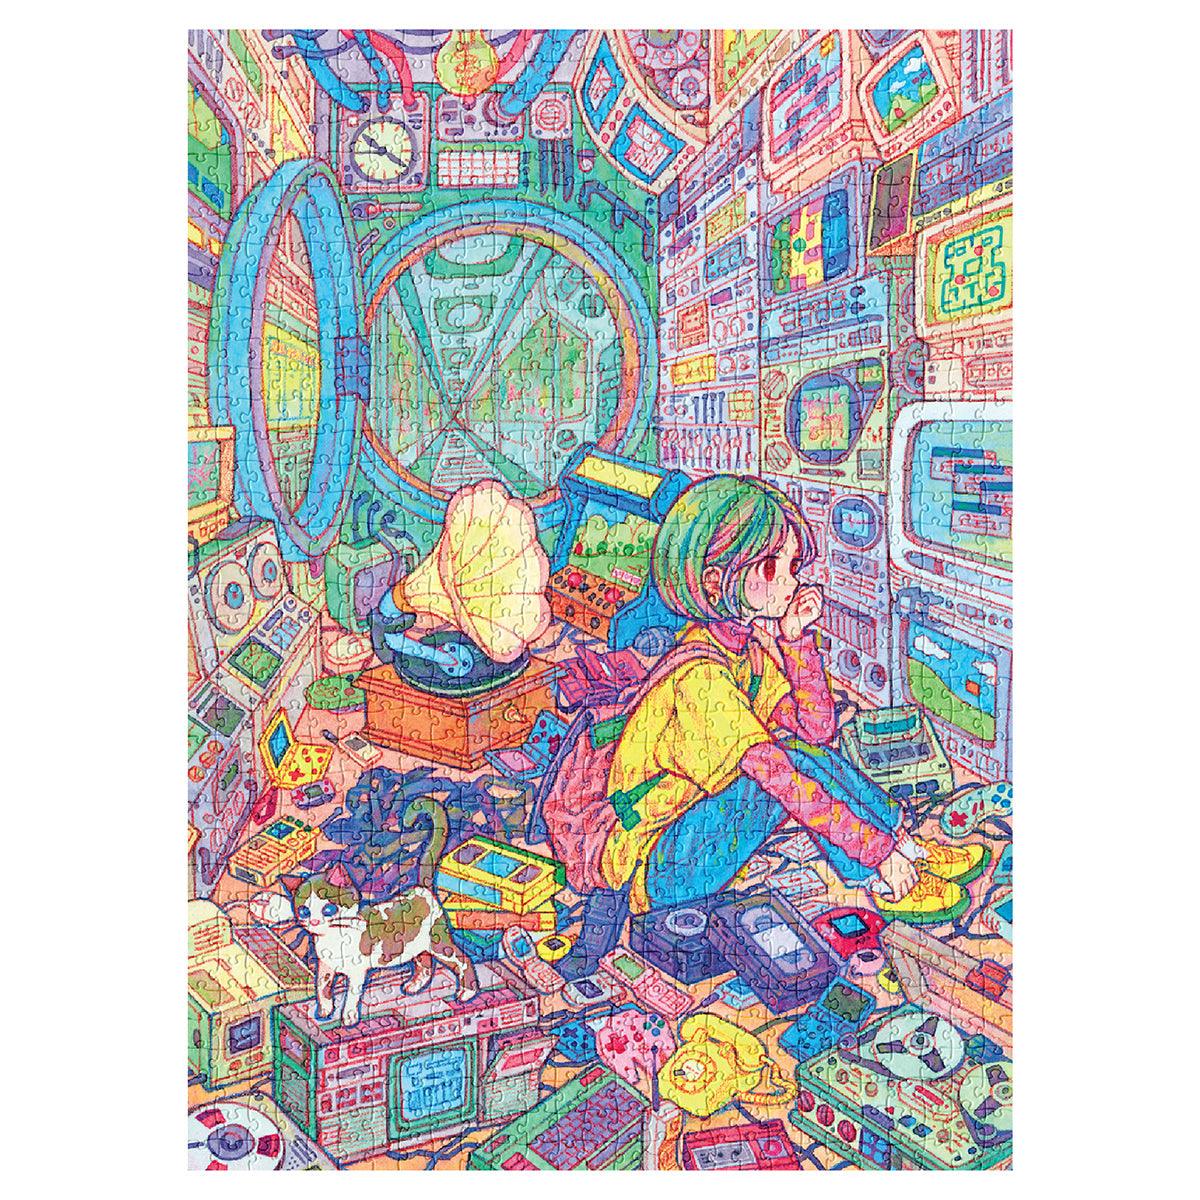 SOONNESS 1000 piece art puzzle electronic fantasy by rowon art